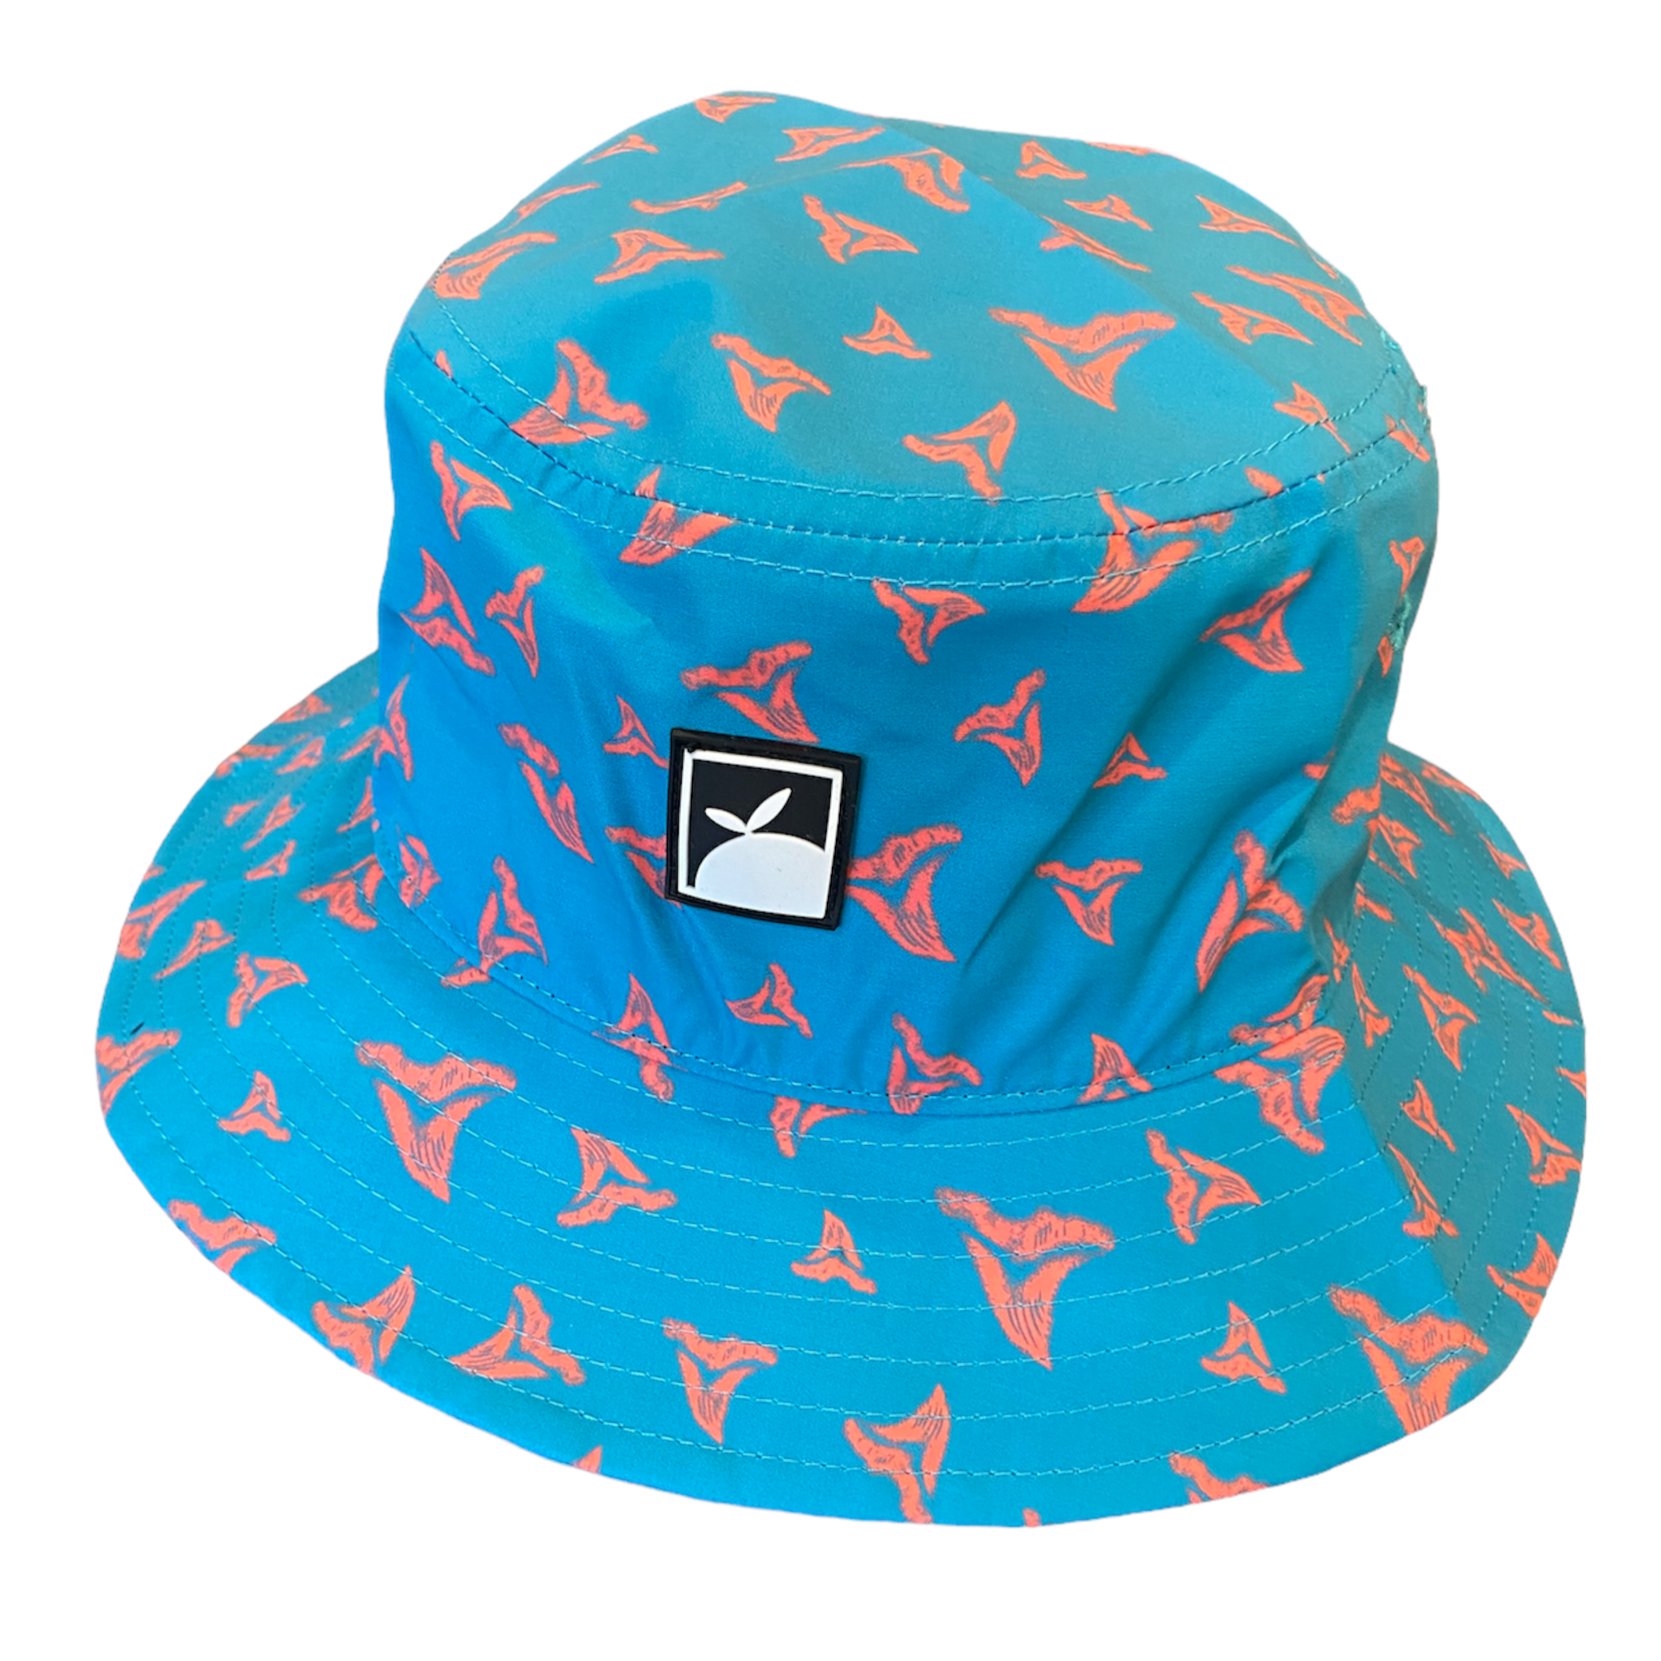 Flomotion Toothy Bucket Hat - Blue tooth print – SURF WORLD SURF SHOP